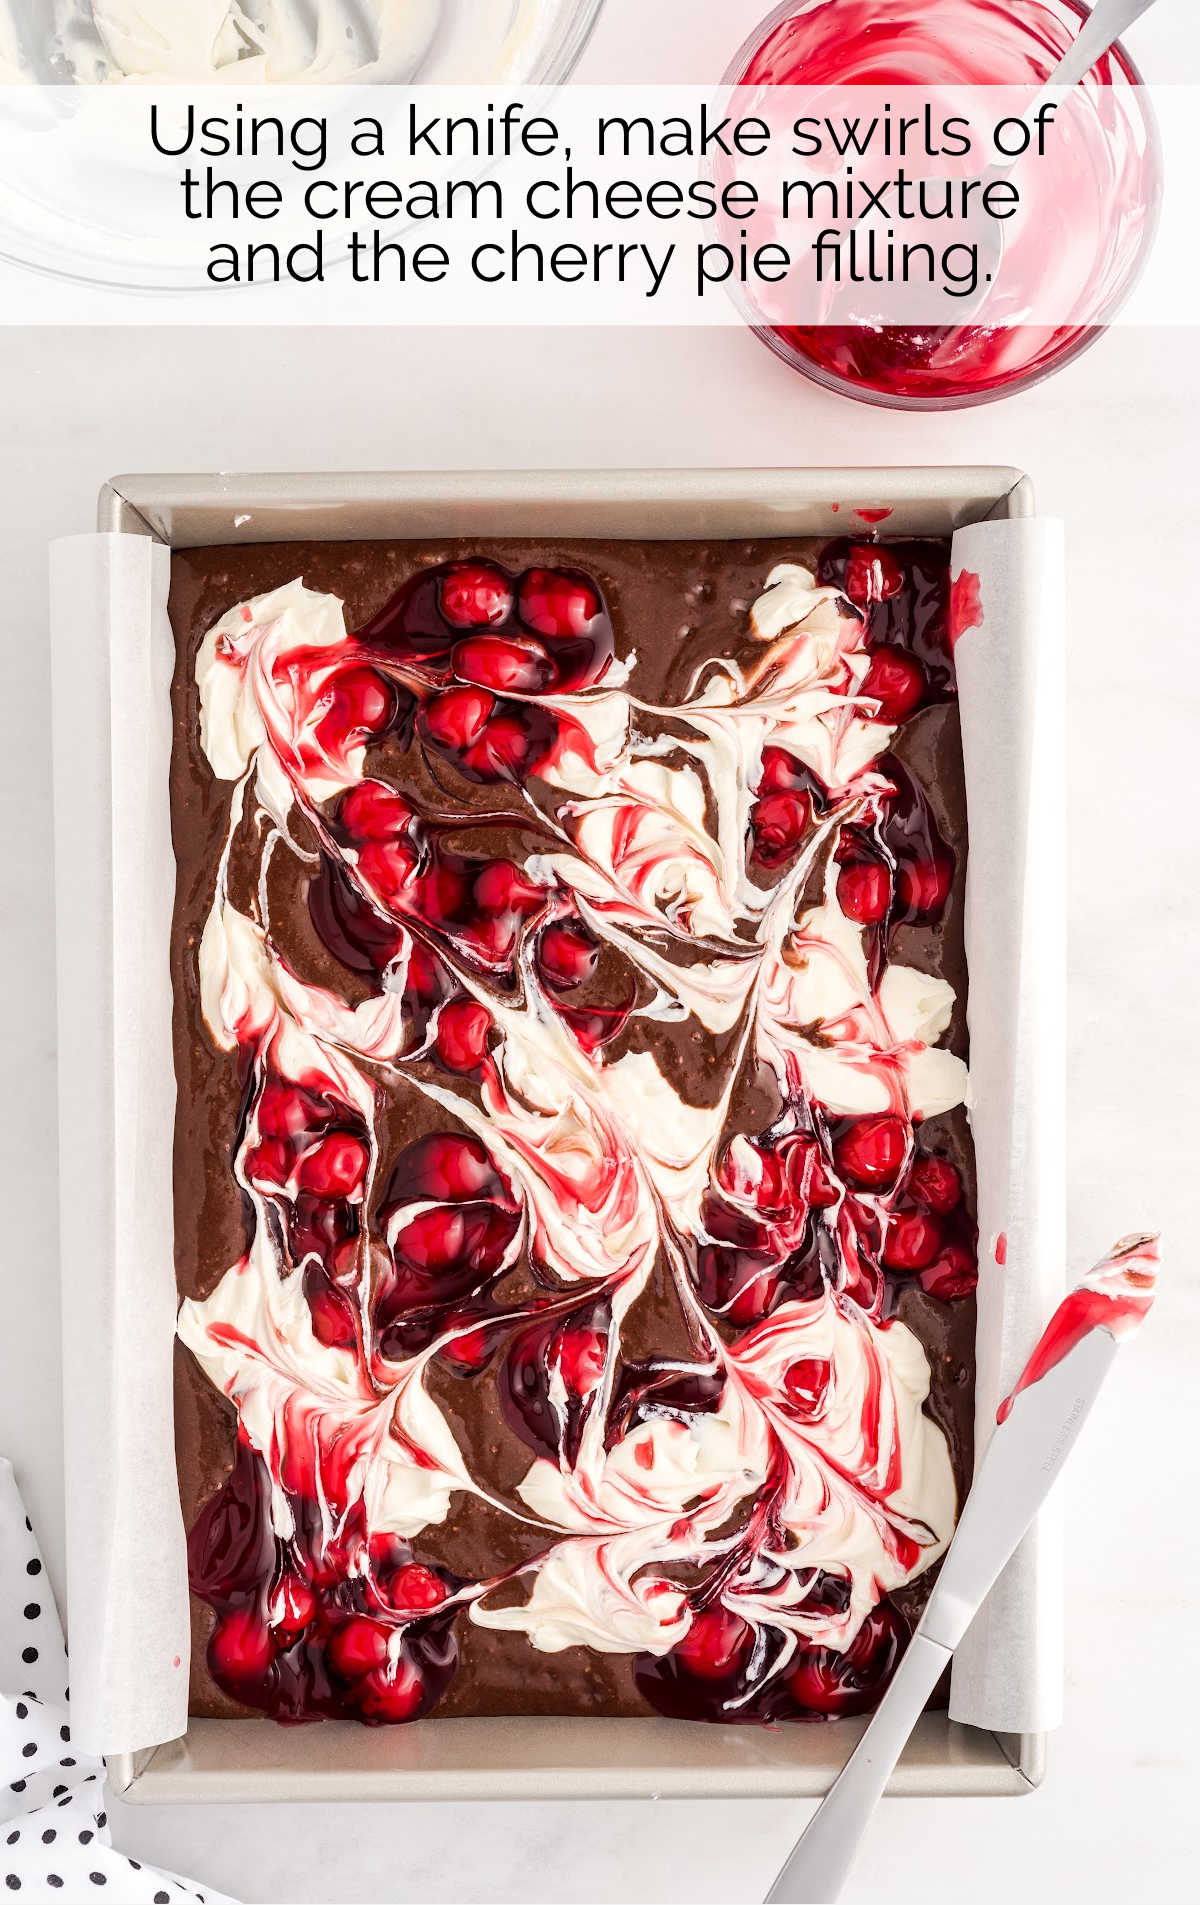 cream cheese mixture and cherry pie filling swirled on top of the brownie batter in a baking pan